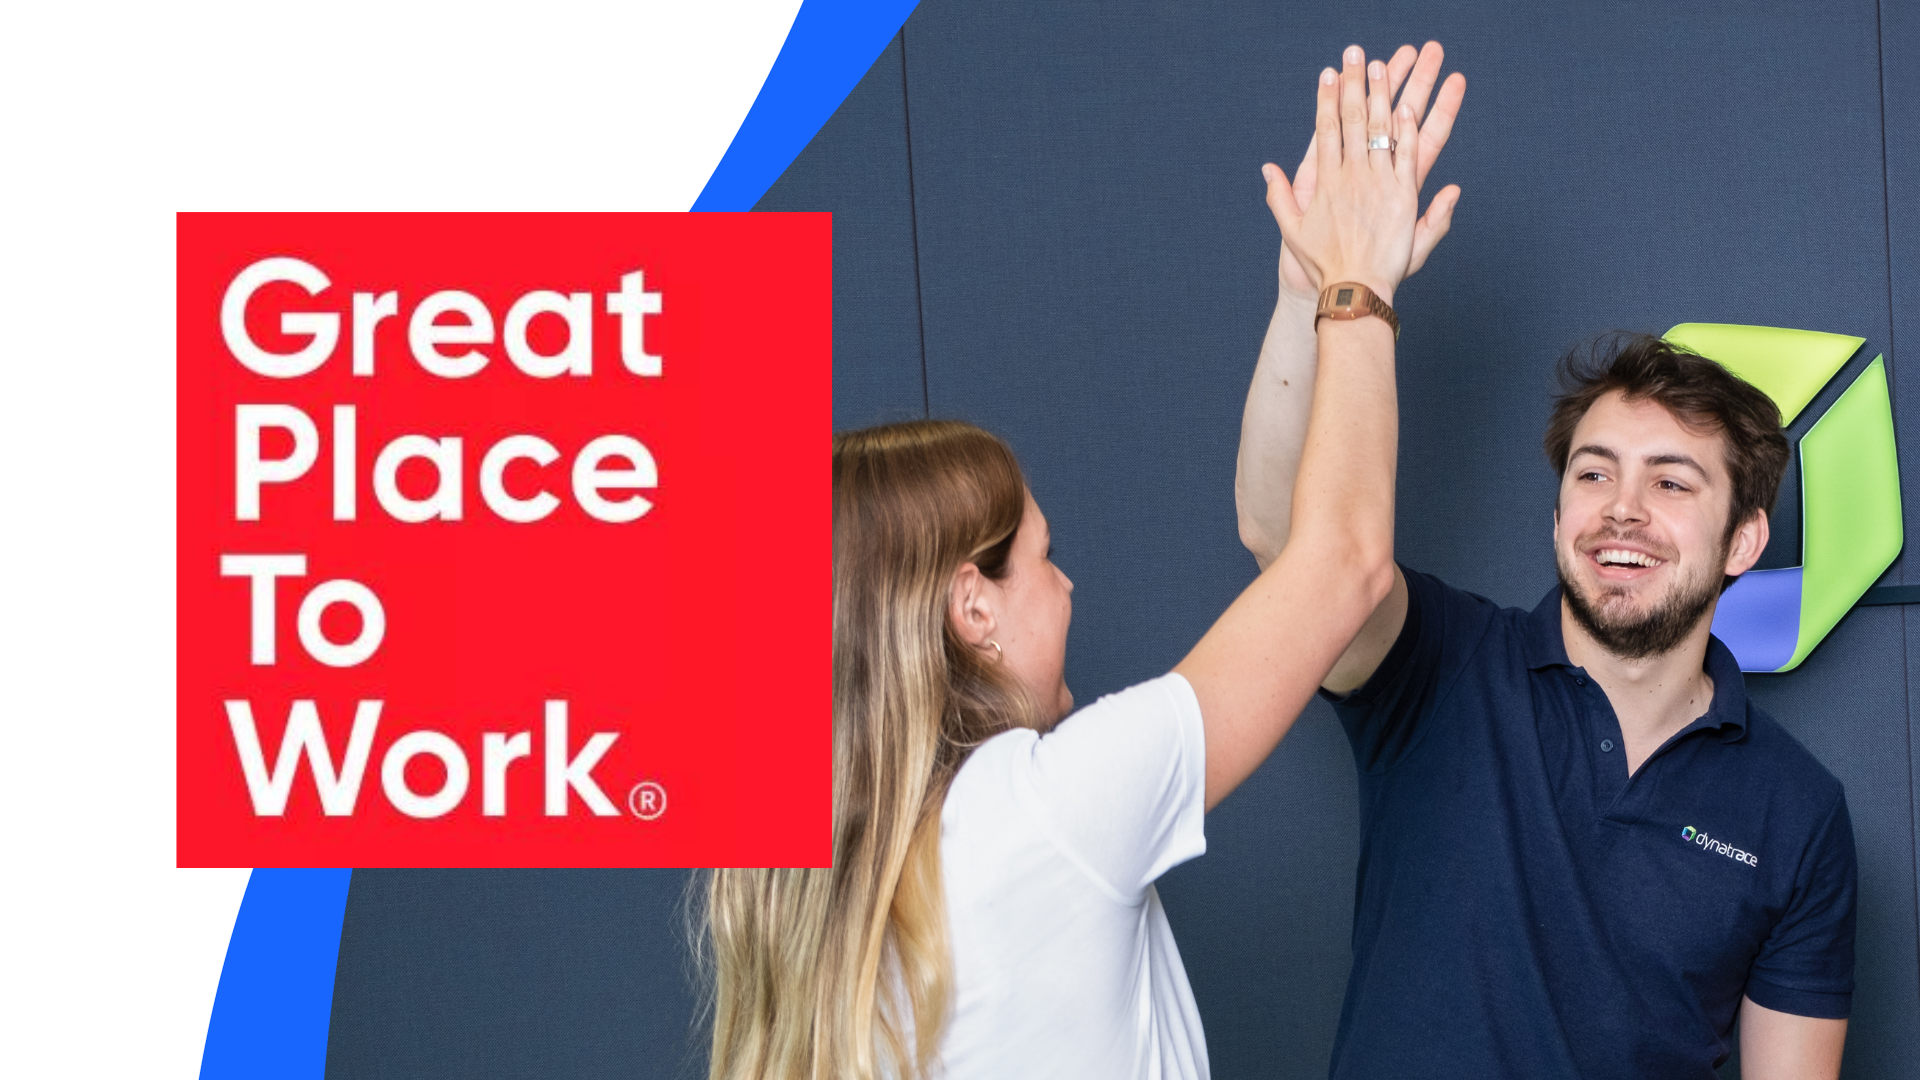 Great place to work award